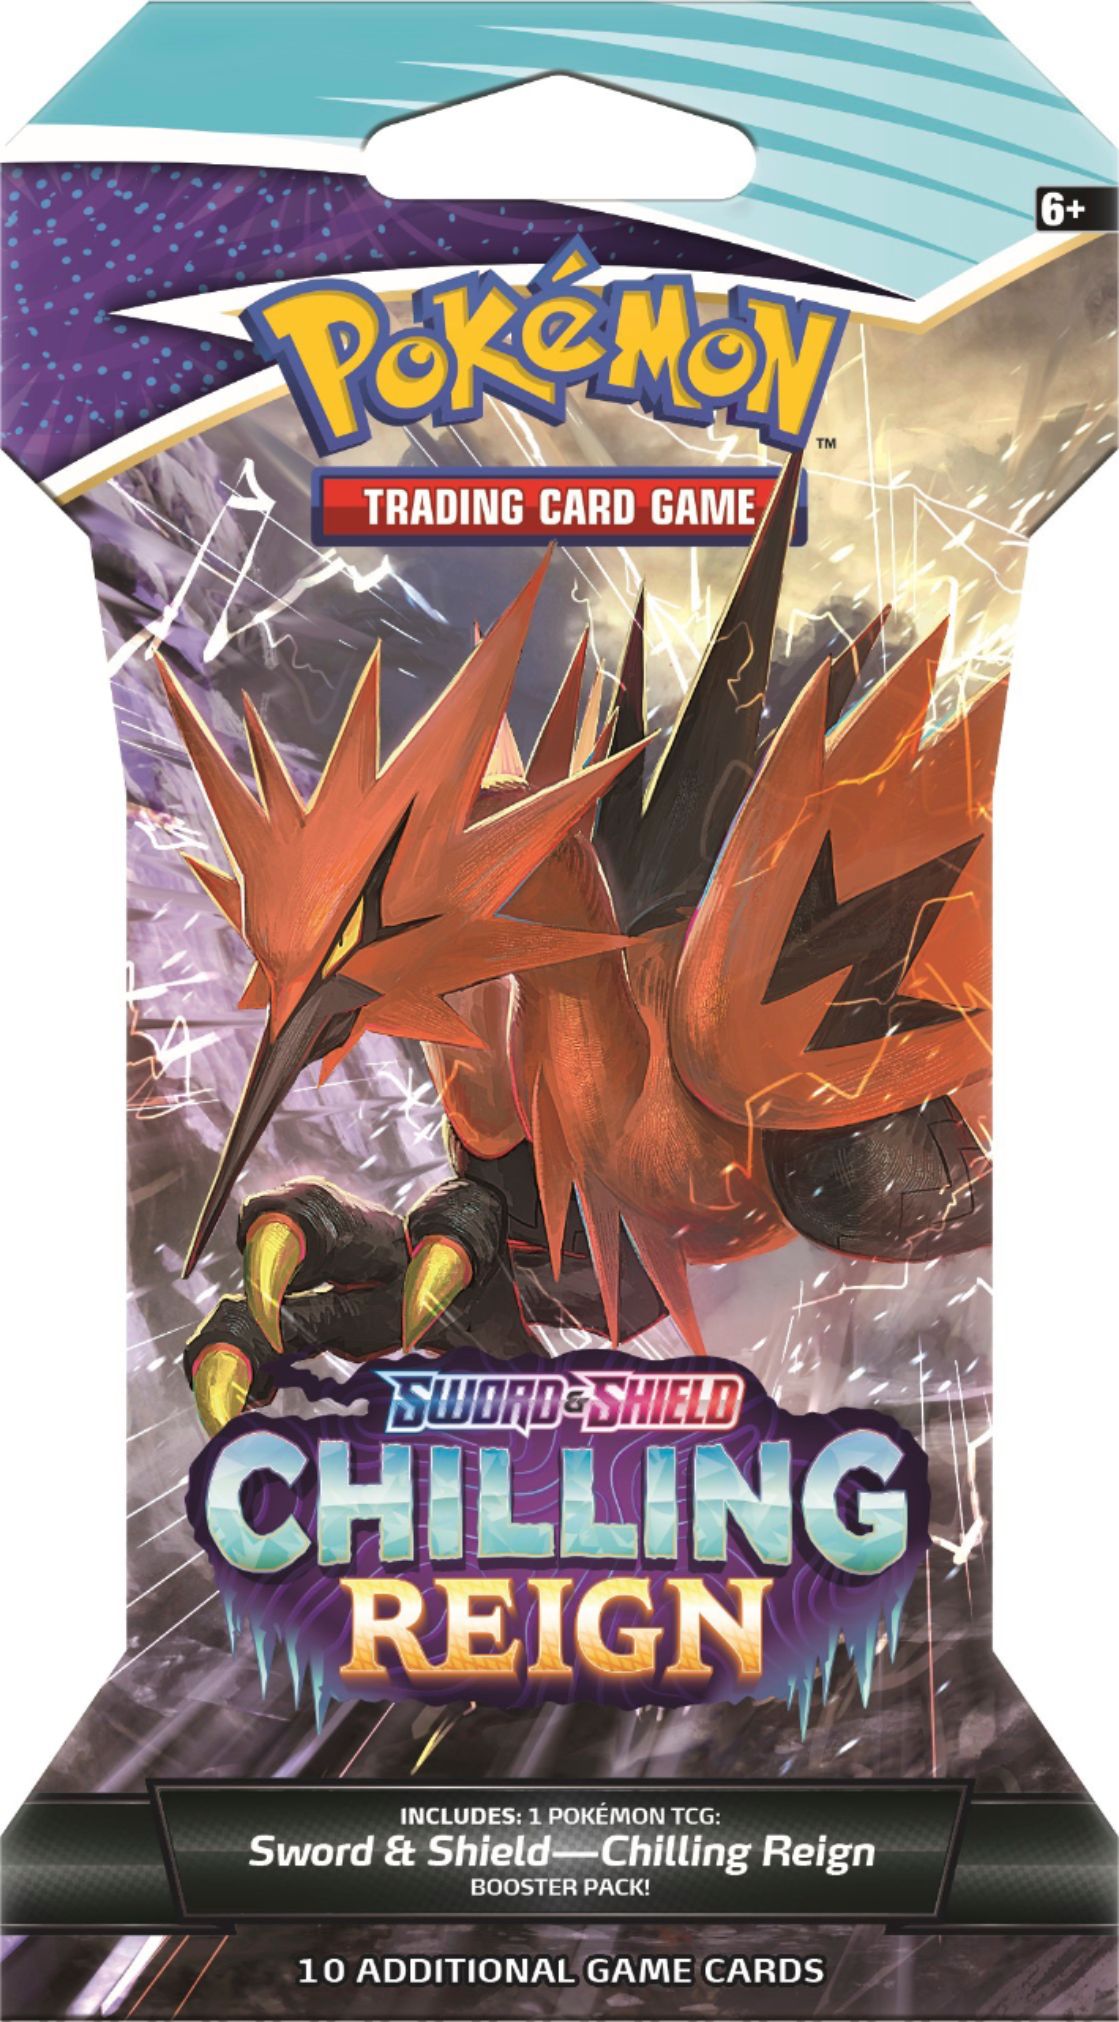 Customer Reviews Pokémon Trading Card Game Sword And Shield Chilling